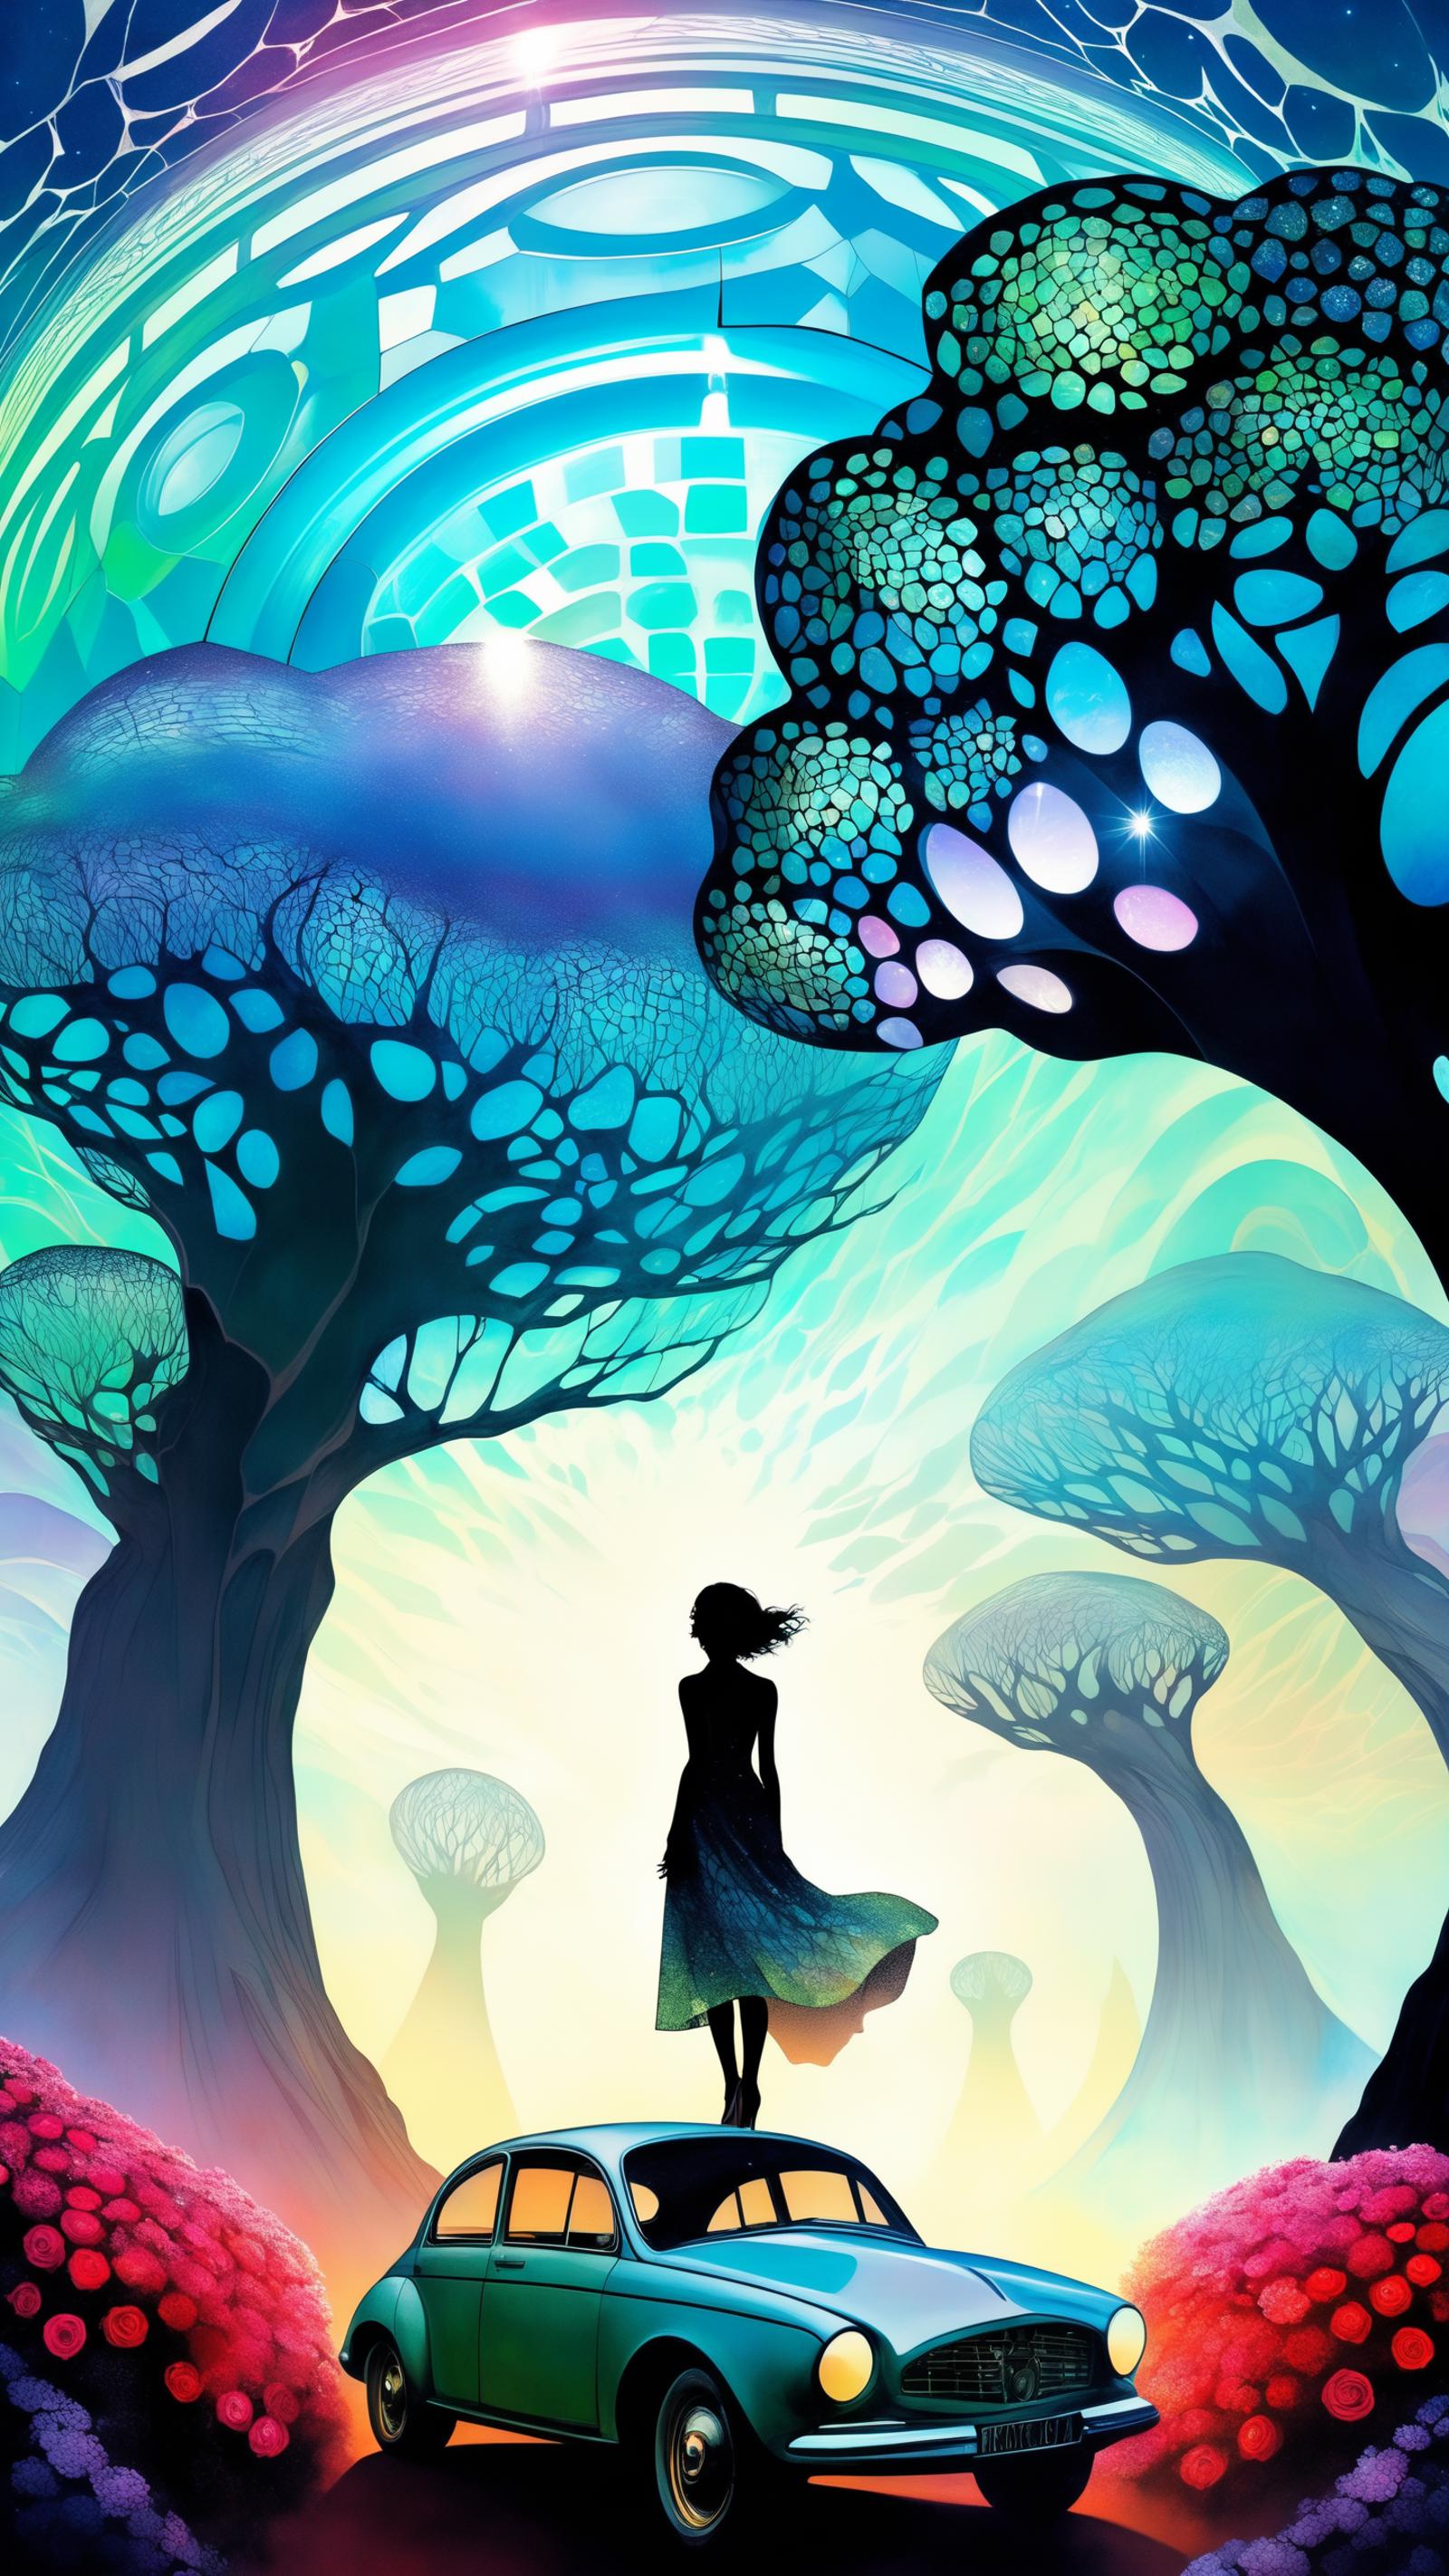 Illustration of a Woman Walking Through a Magical Forest of Tall Trees and Mushrooms